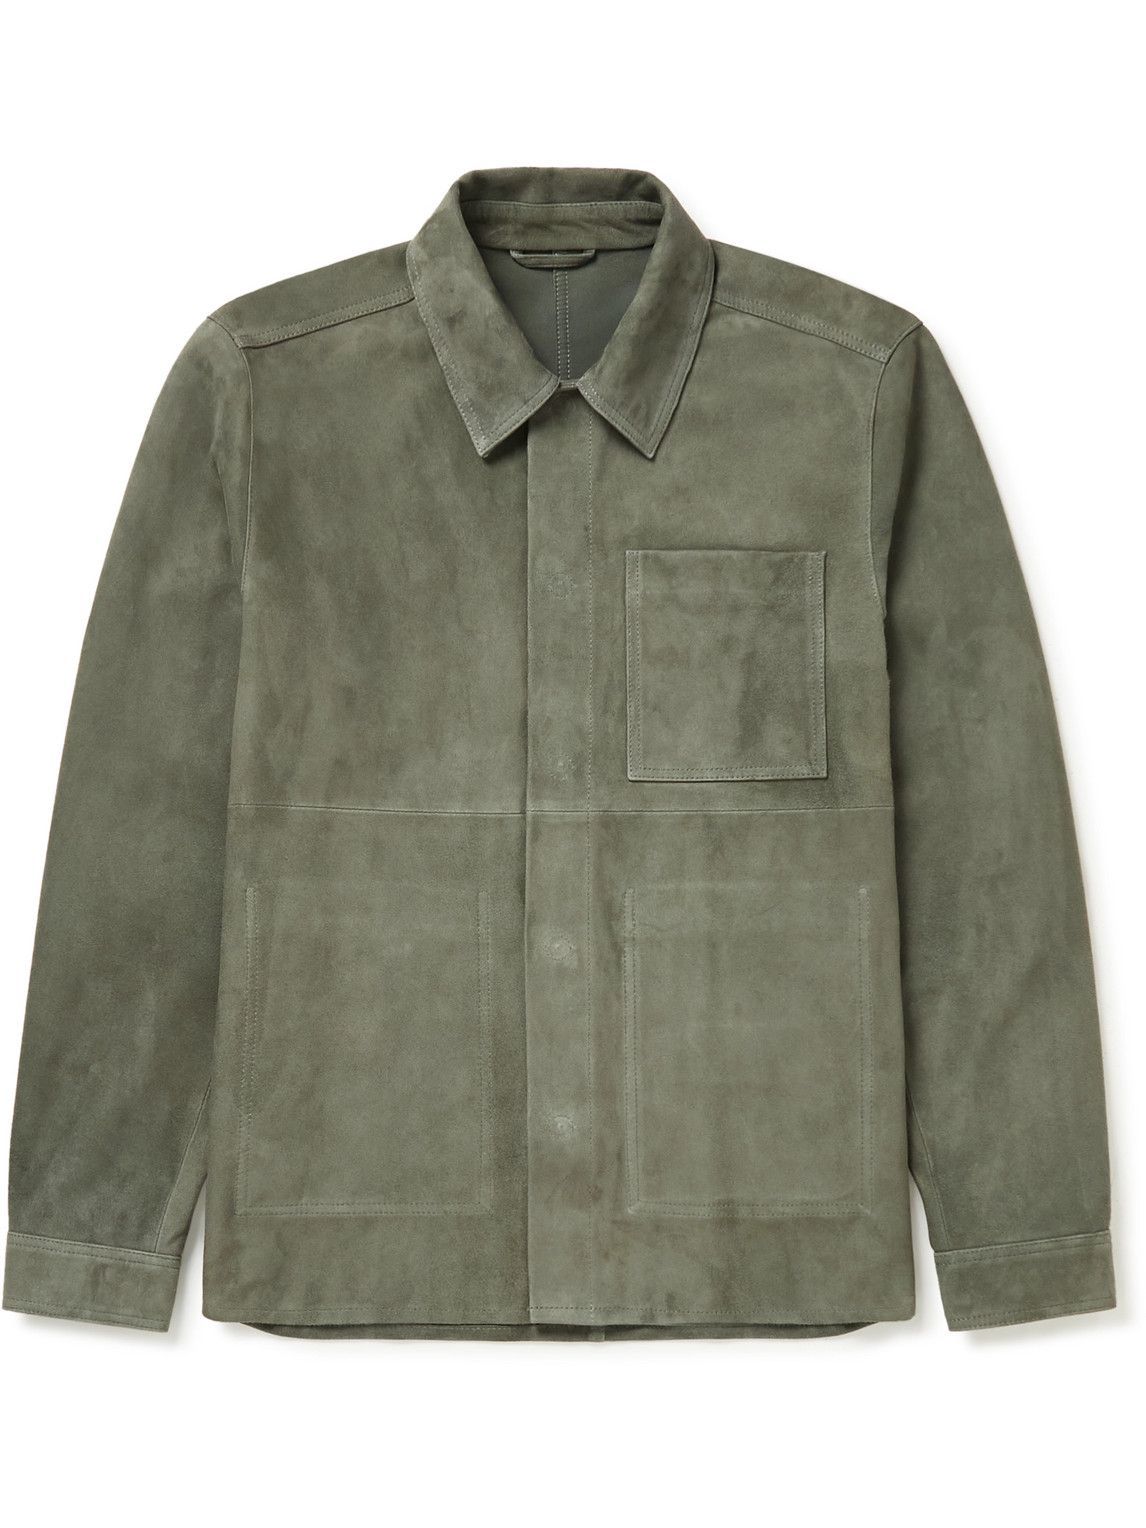 Mr P. - Suede Overshirt - Green Mr P.